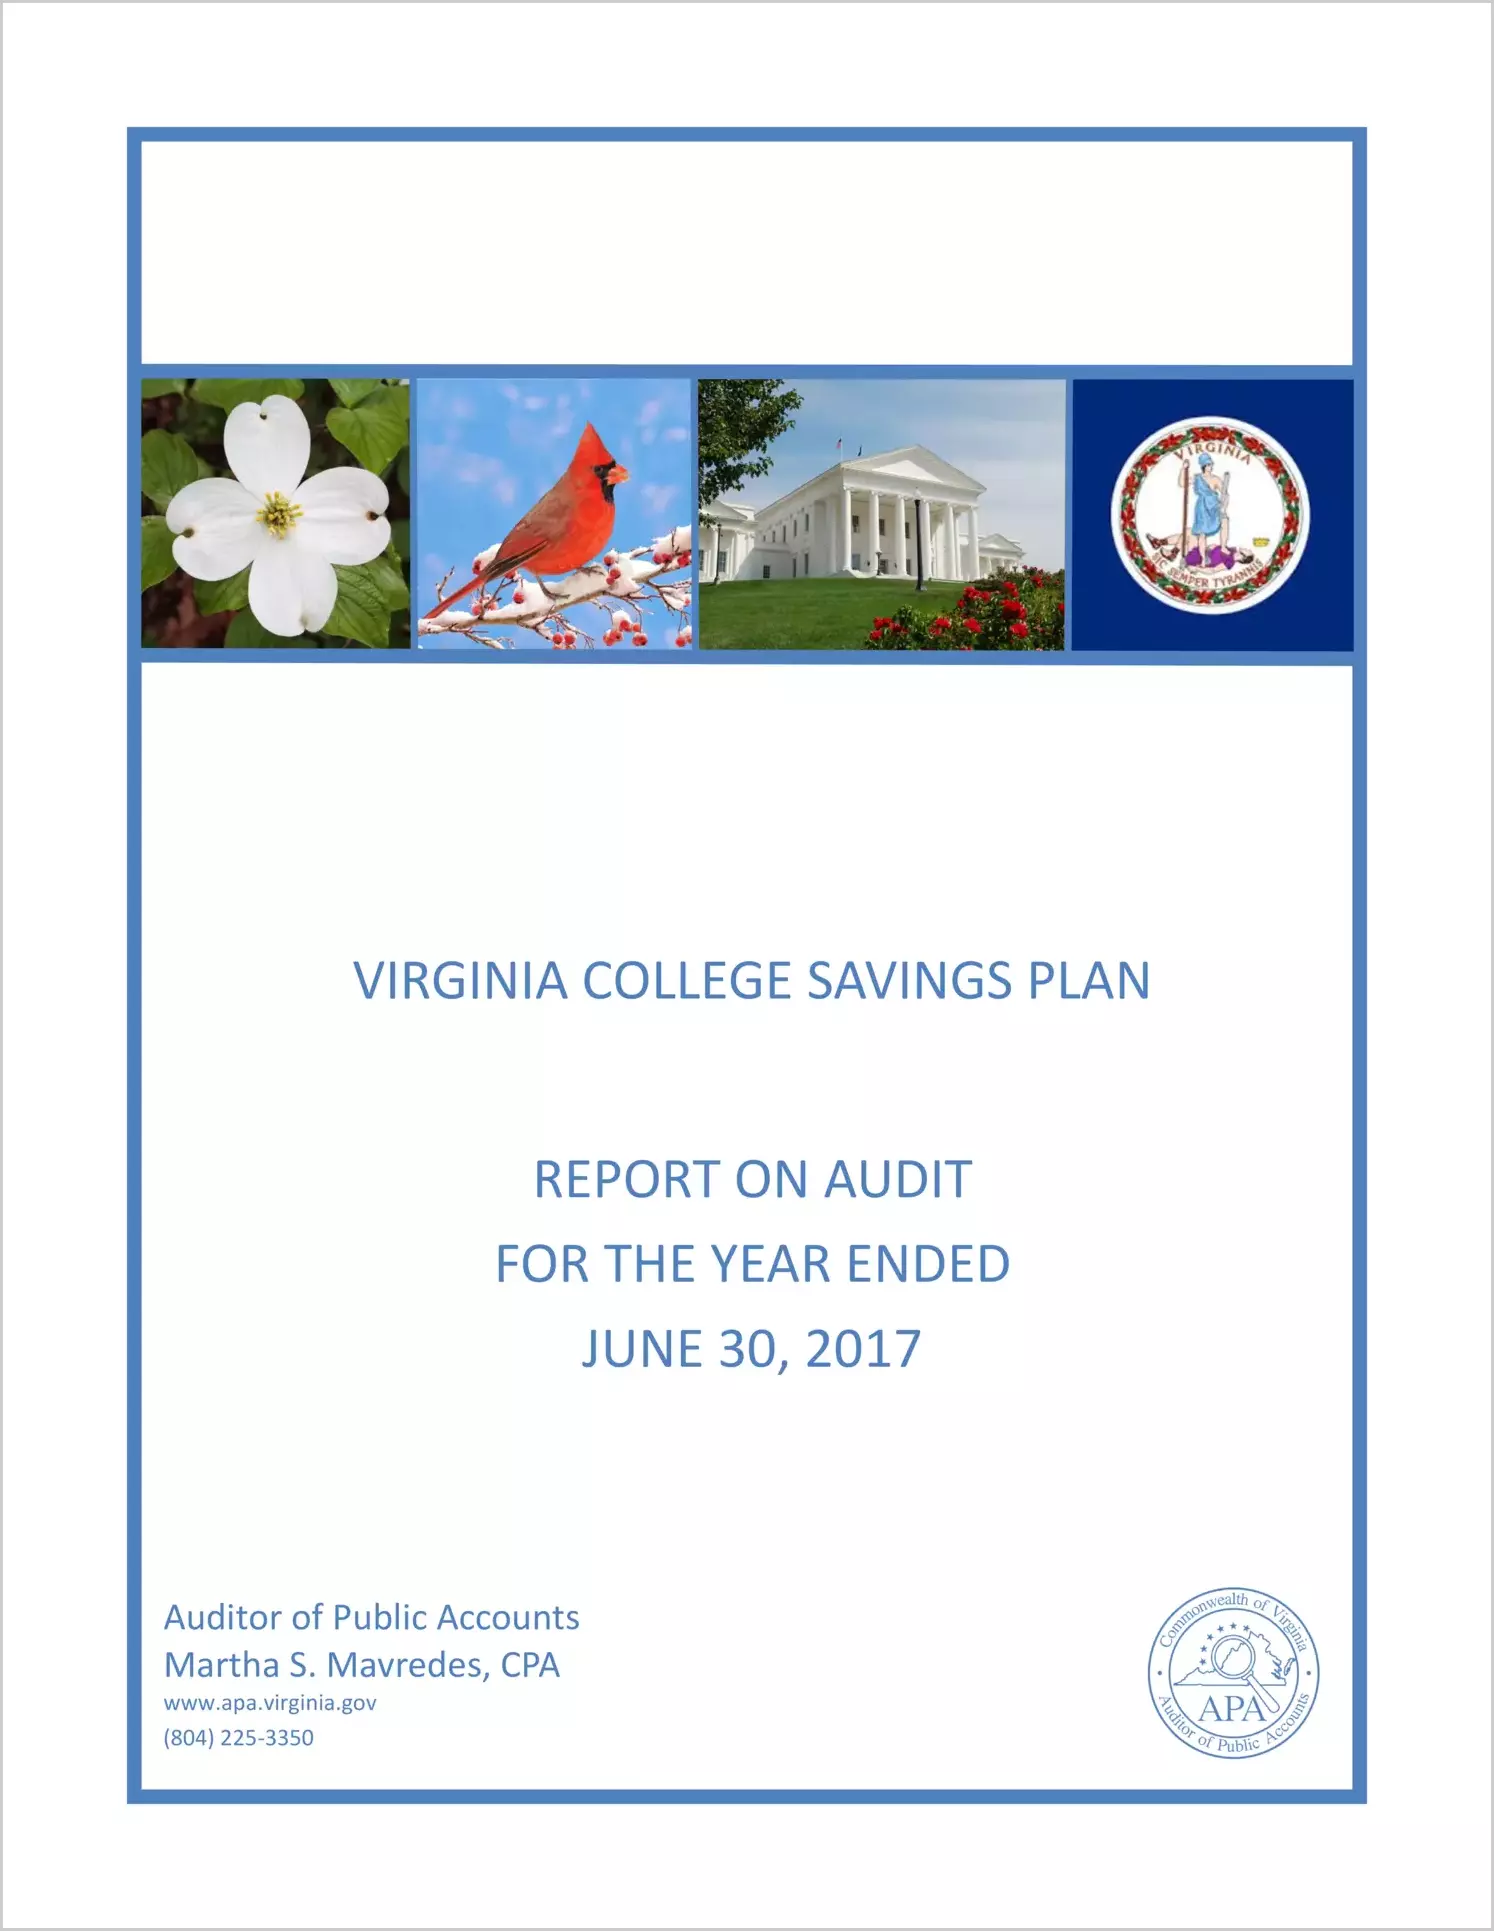 Virginia College Savings Plan for the year ended June 30, 2017